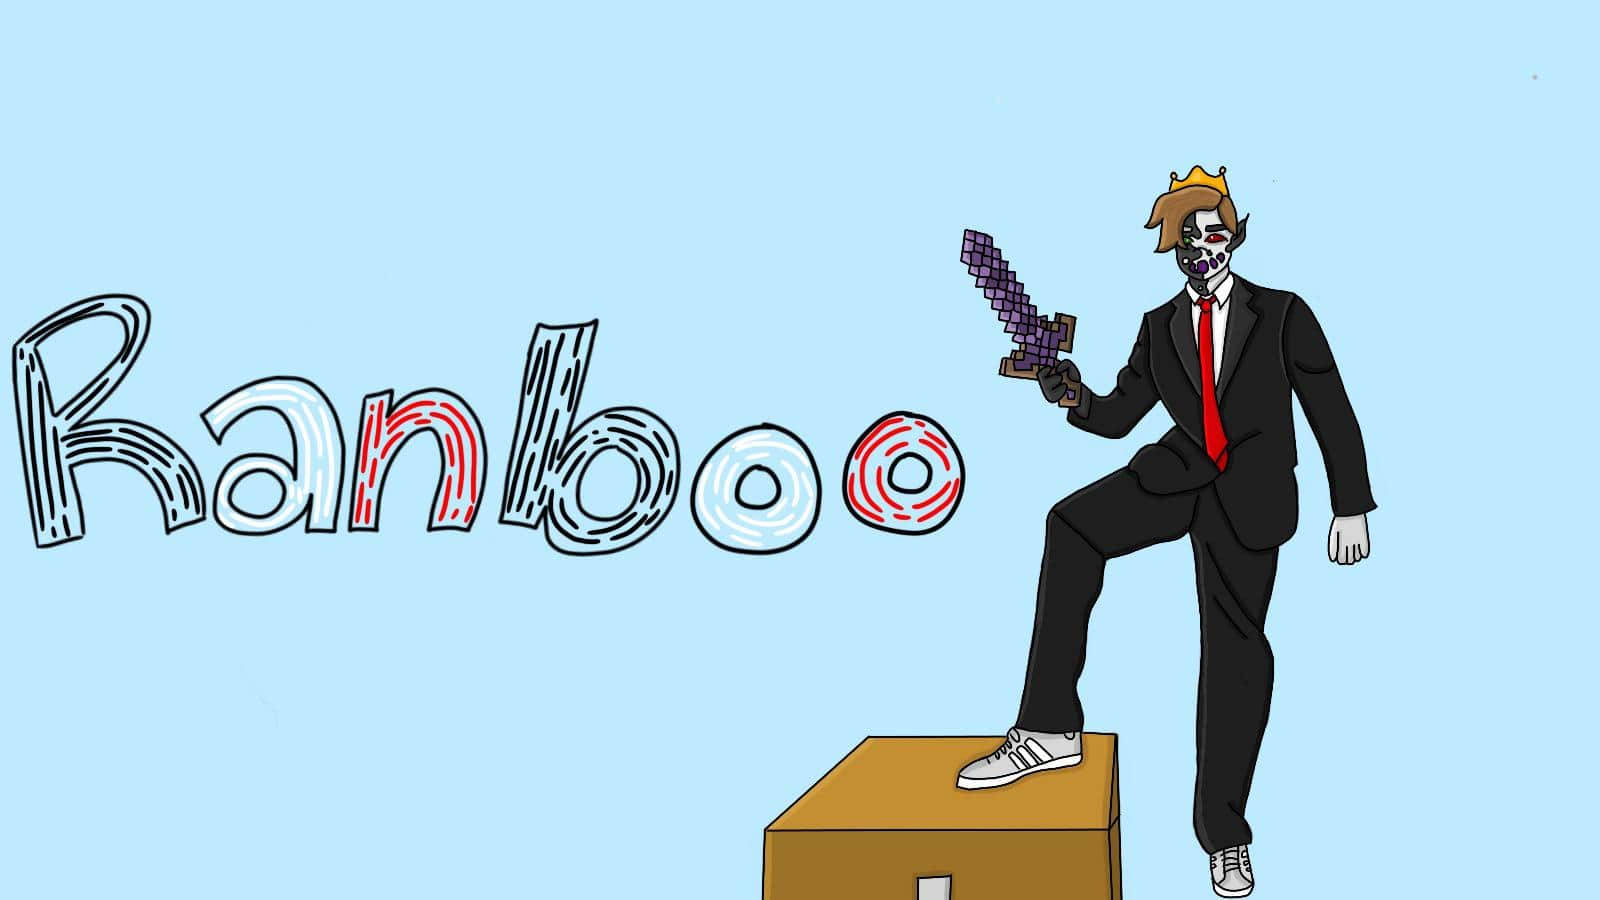 Ranboo With A Sword Background